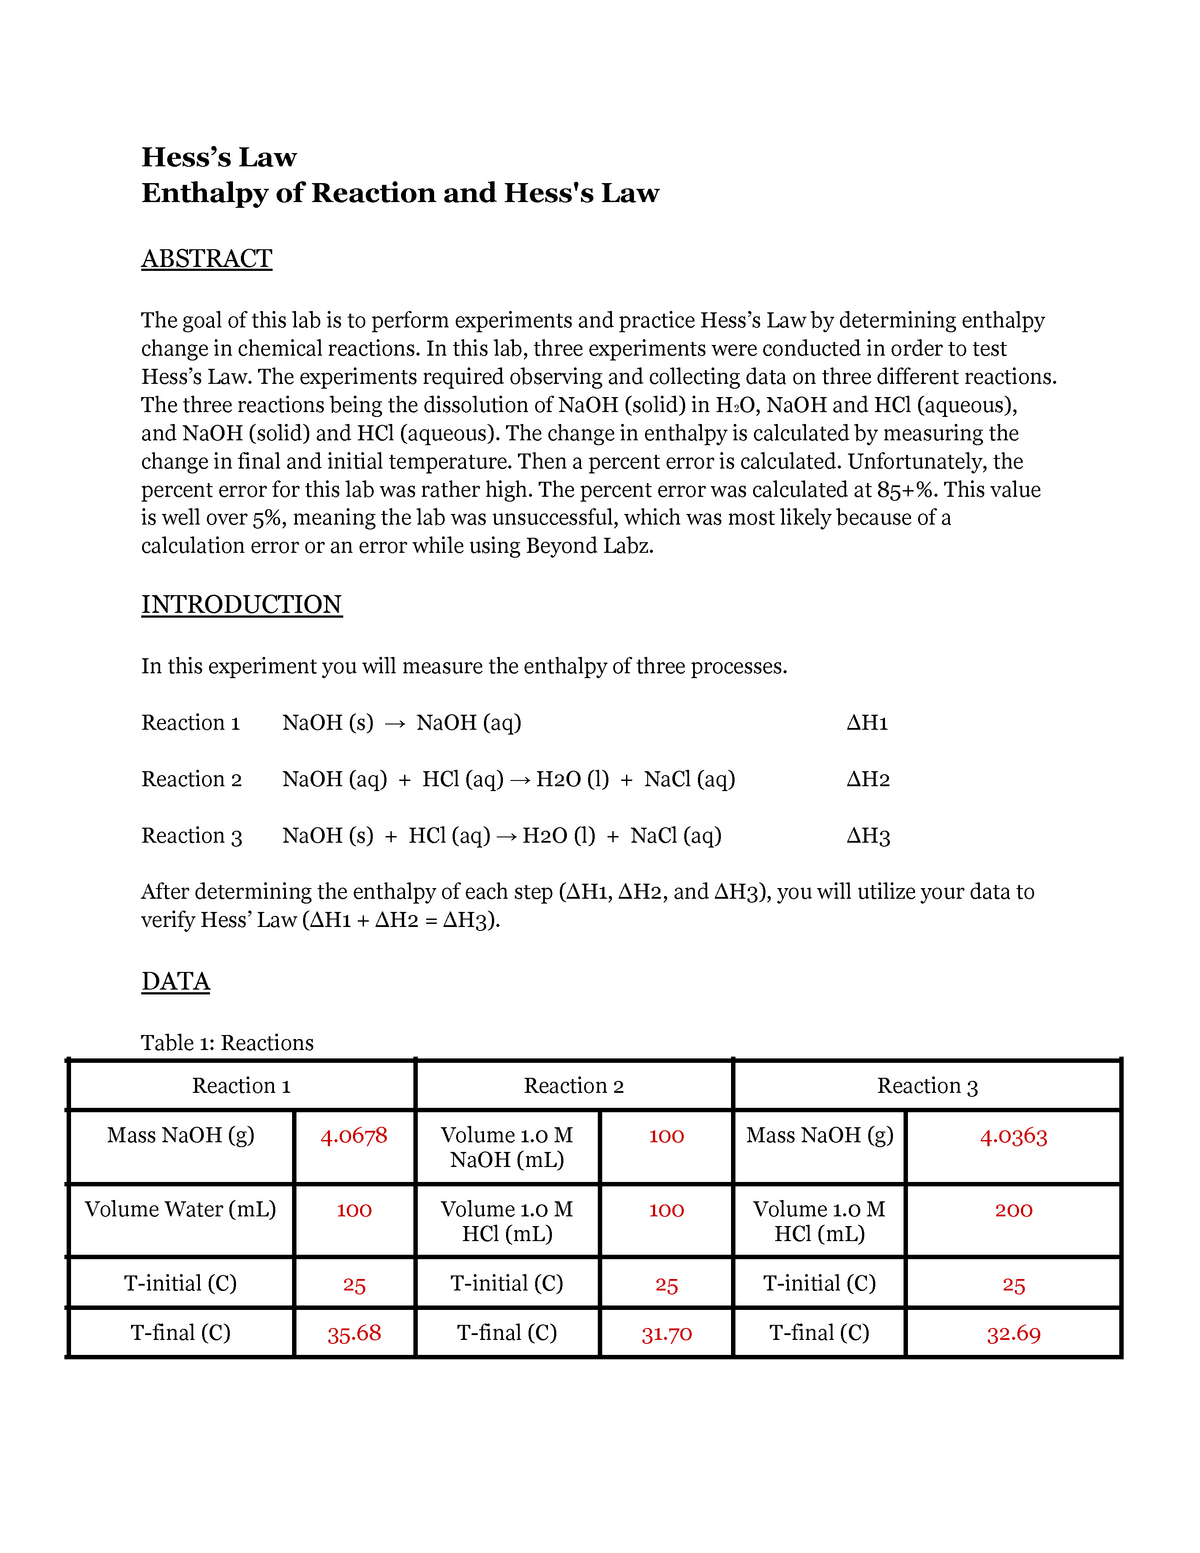 Hess s Law Lab Worksheet Hess s Law Enthalpy of Reaction and Hess s